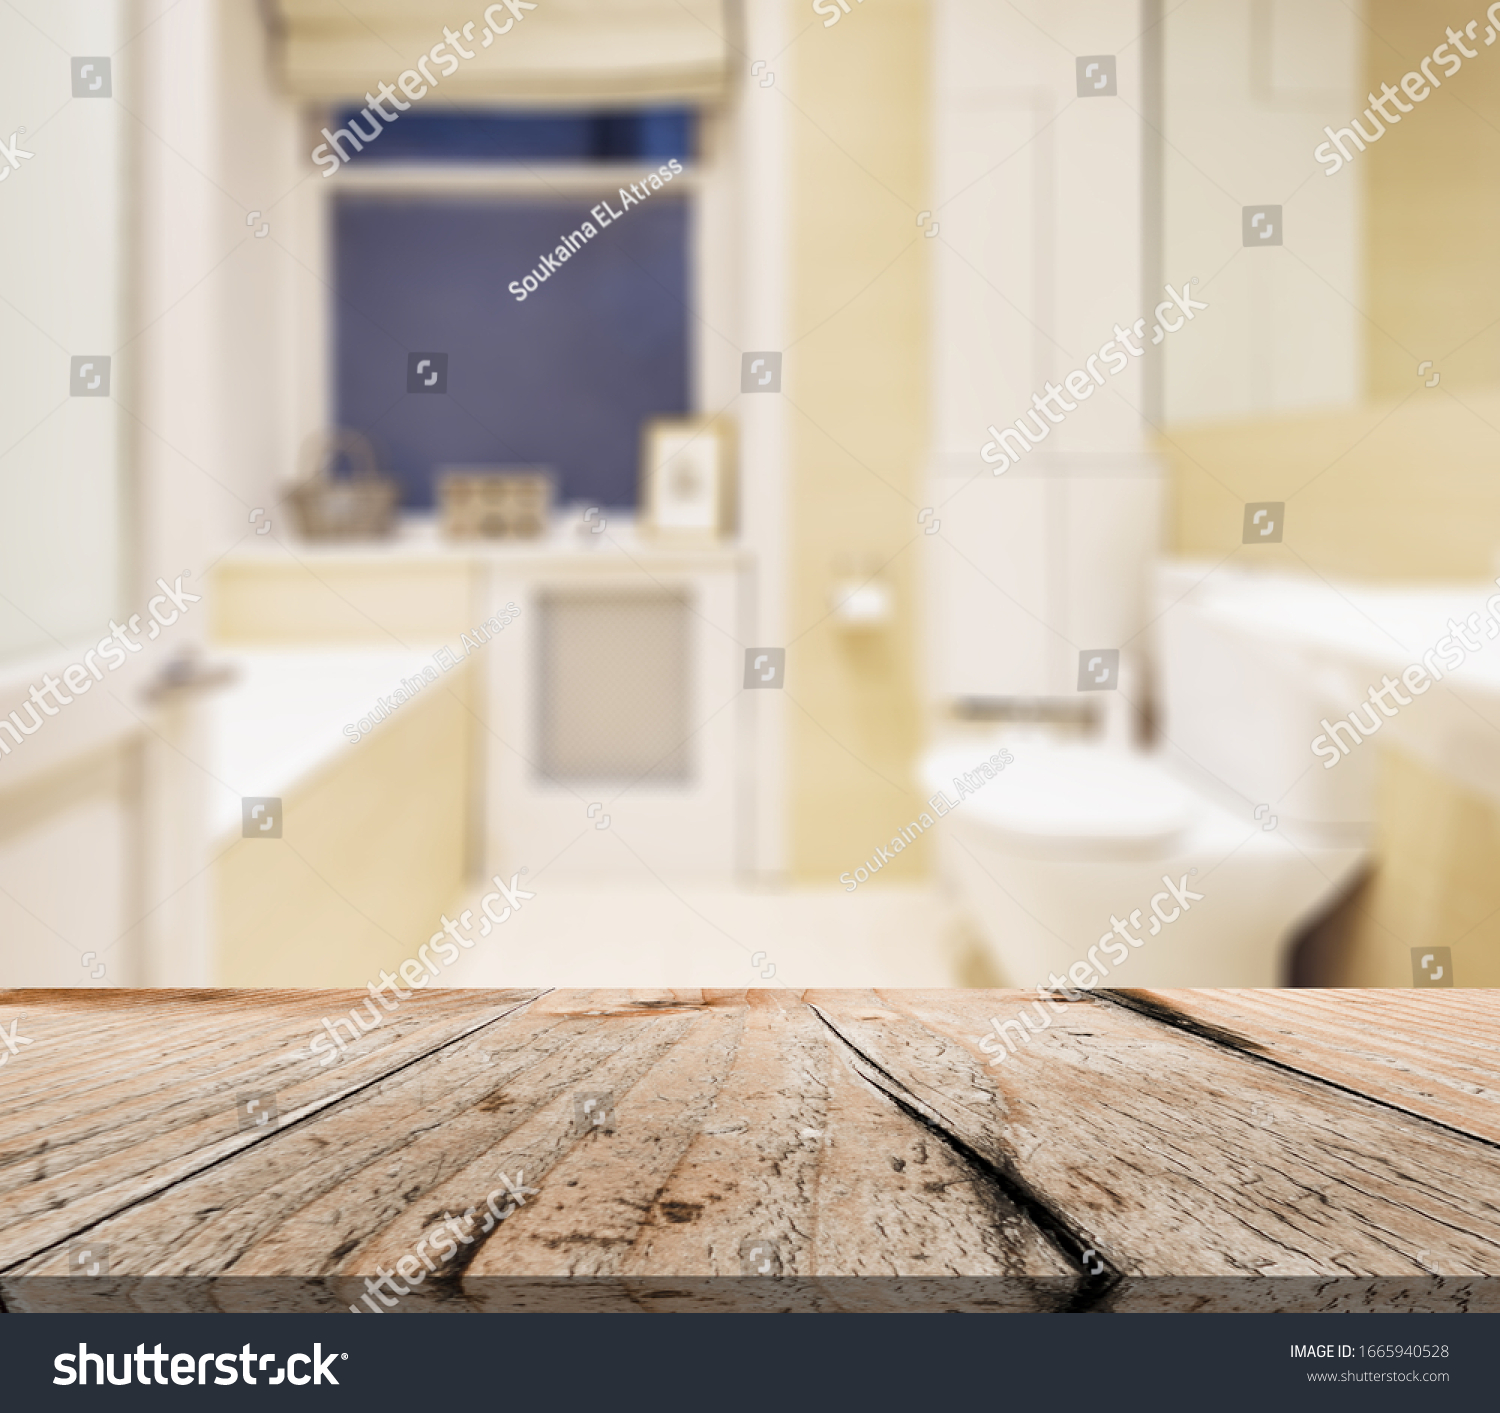 Table Top And Blur Bathroom Of The Background #1665940528